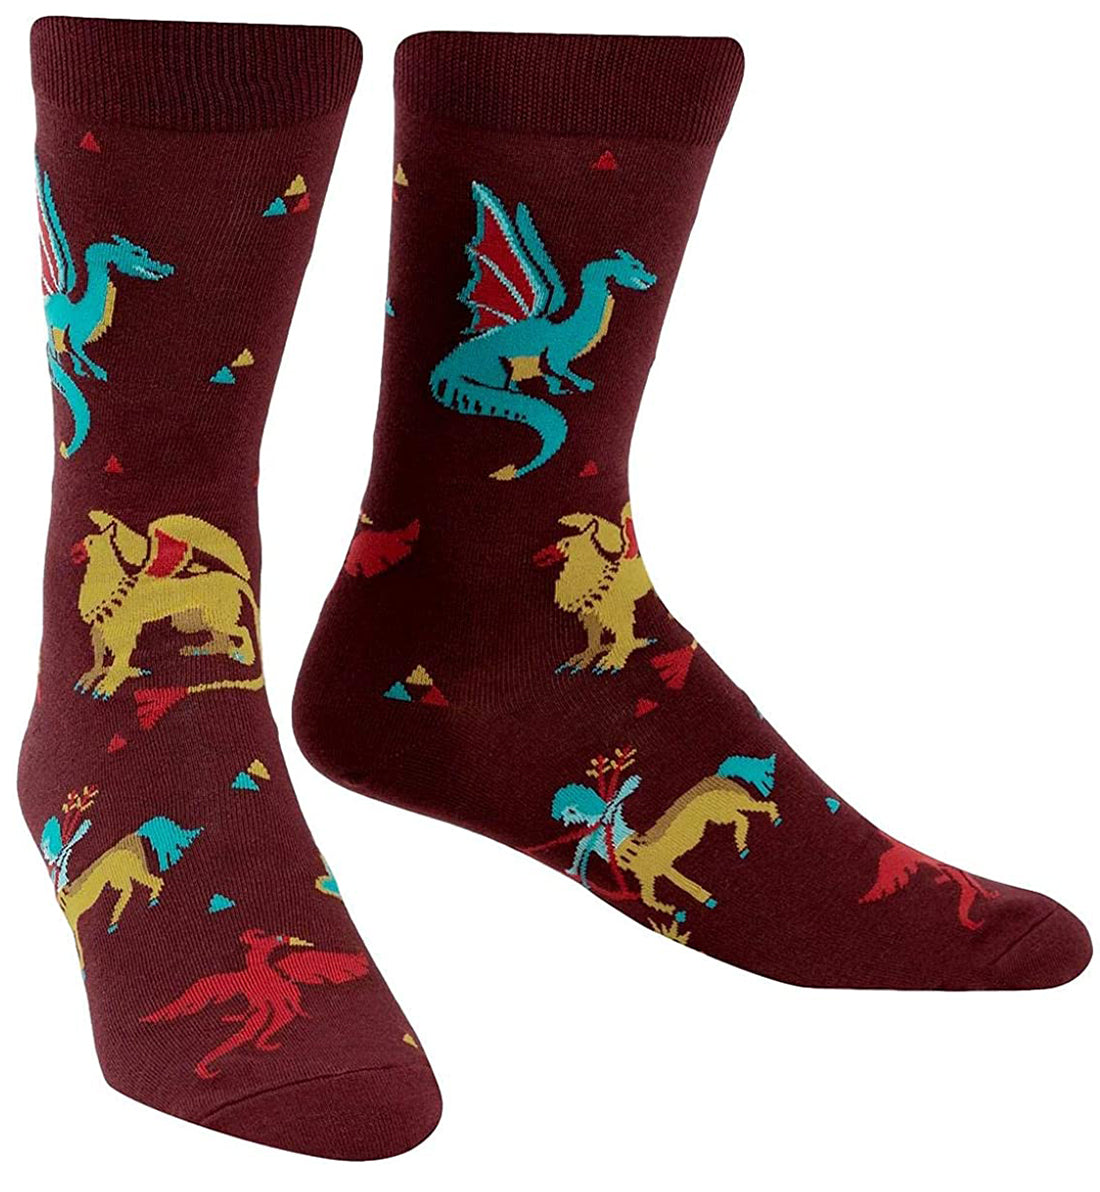 SOCK it to me Men's Crew Socks (MEF0458),Beasts of Yore - Beasts of Yore,One Size